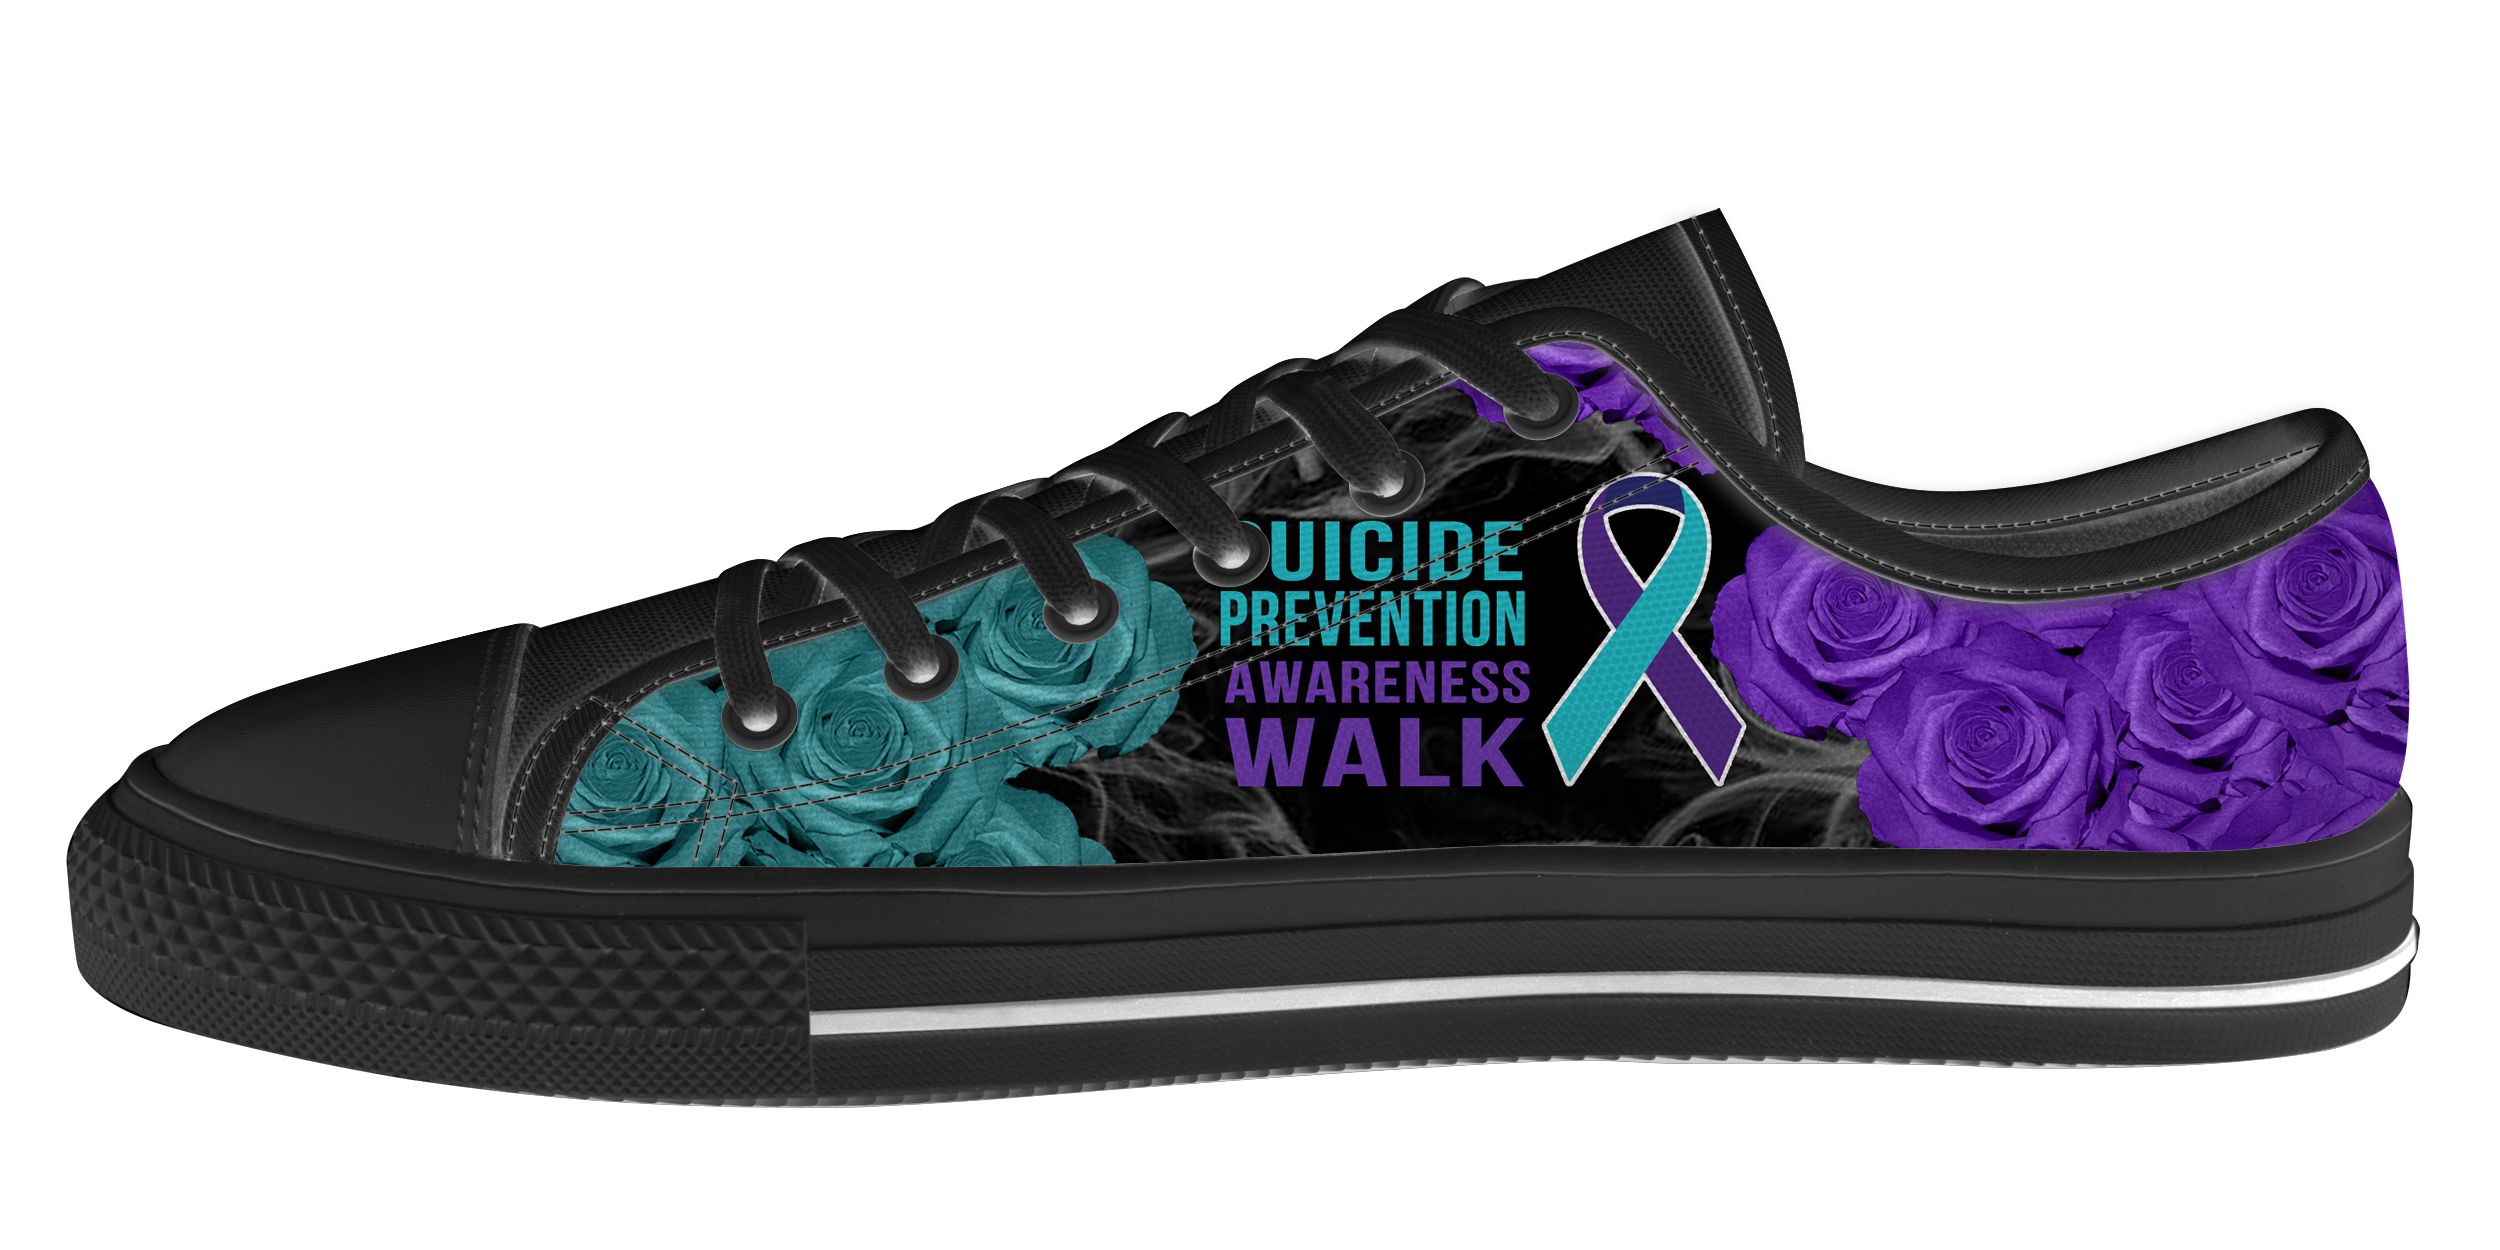 Suicide Prevention Awareness Walk Flowers Low Top Shoes PAN